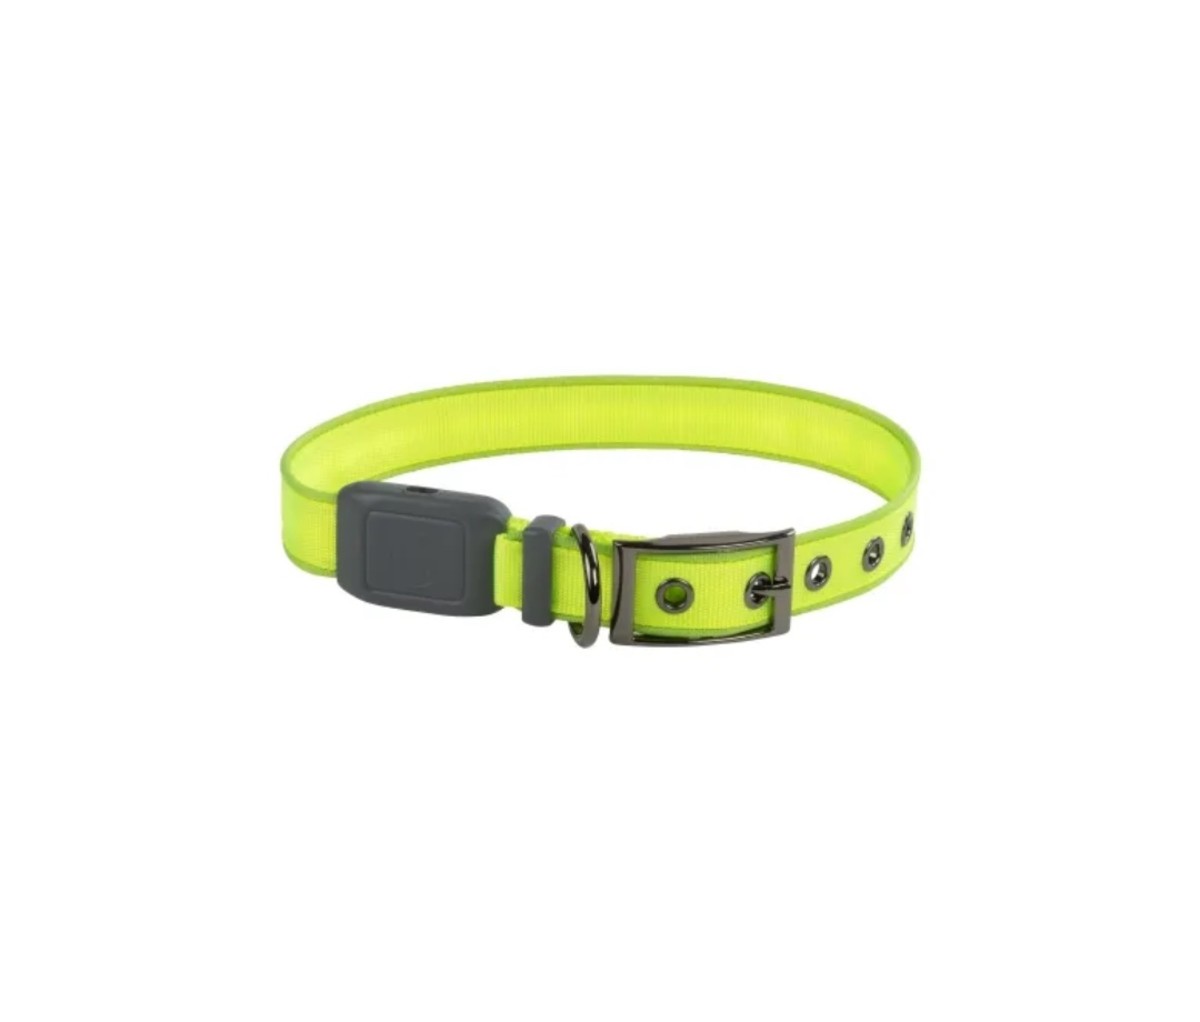 Keep close tabs on your dog in the dark with the Nite Ice LED Dog Collar.